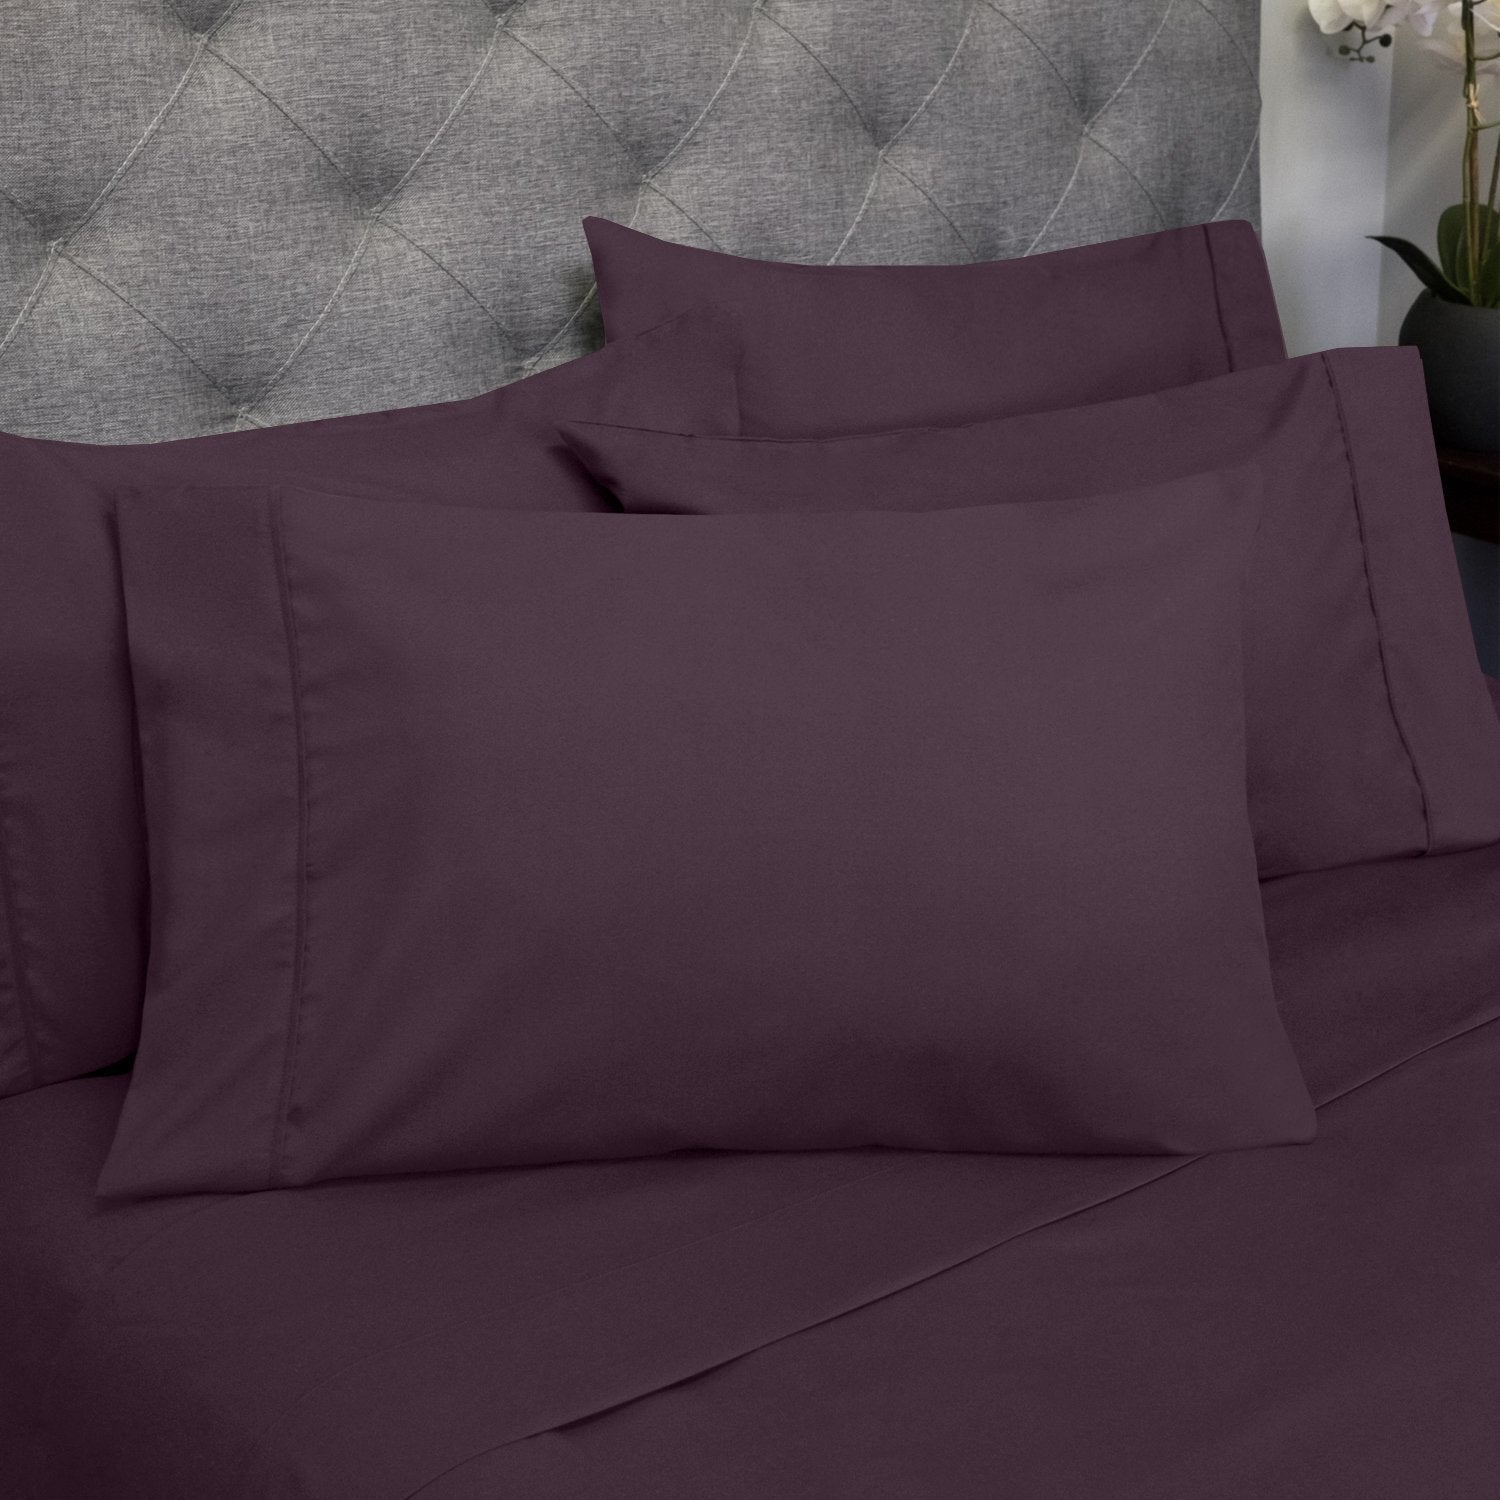 Deluxe 6-Piece Bed Sheet Set (Eggplant) - Pillowcases